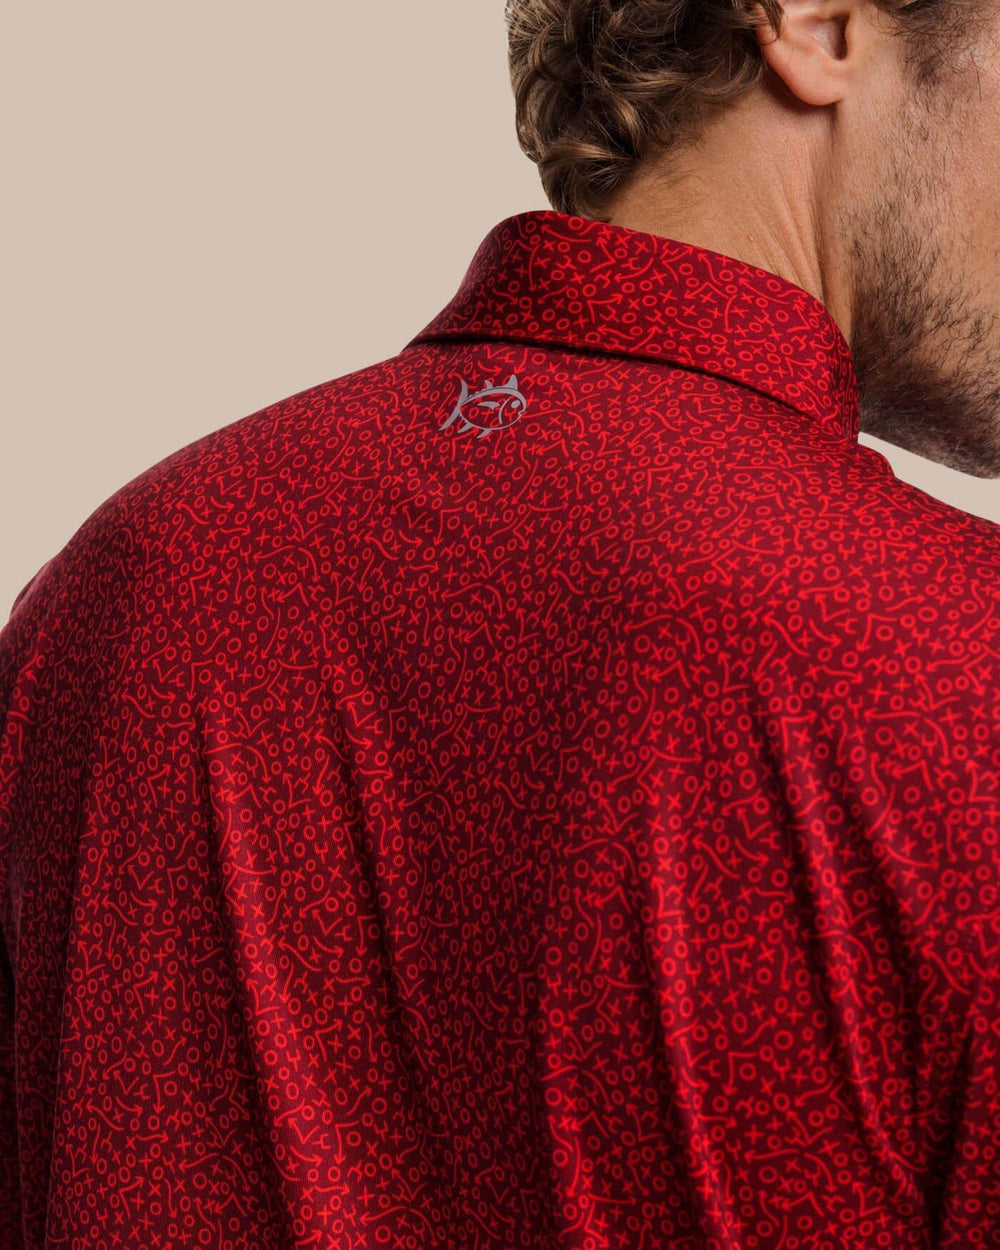 The back view of the Southern Tide Driver Gameplay Polo by Southern Tide - Chianti